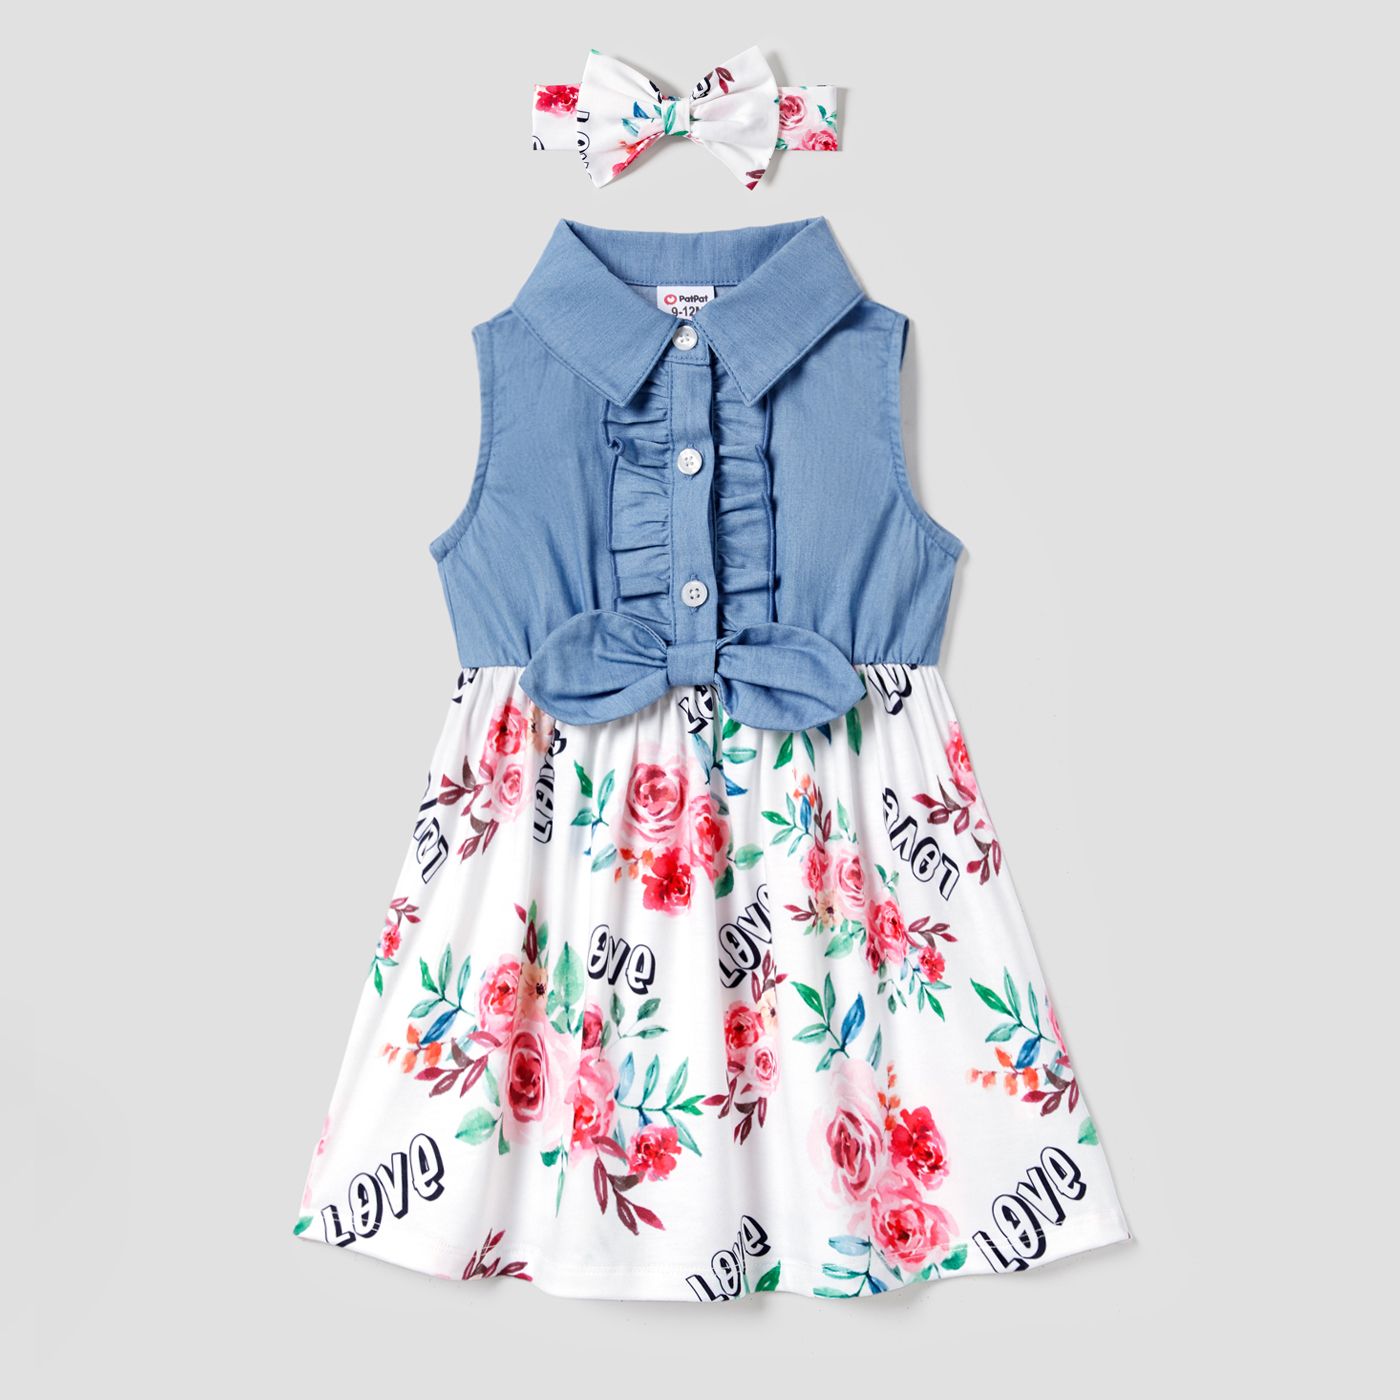 Family Matching Letter And Floral Print Splicing Denim Blue Bow Belted Sleeveless Dresses With Headband And Collared T-shirts Set